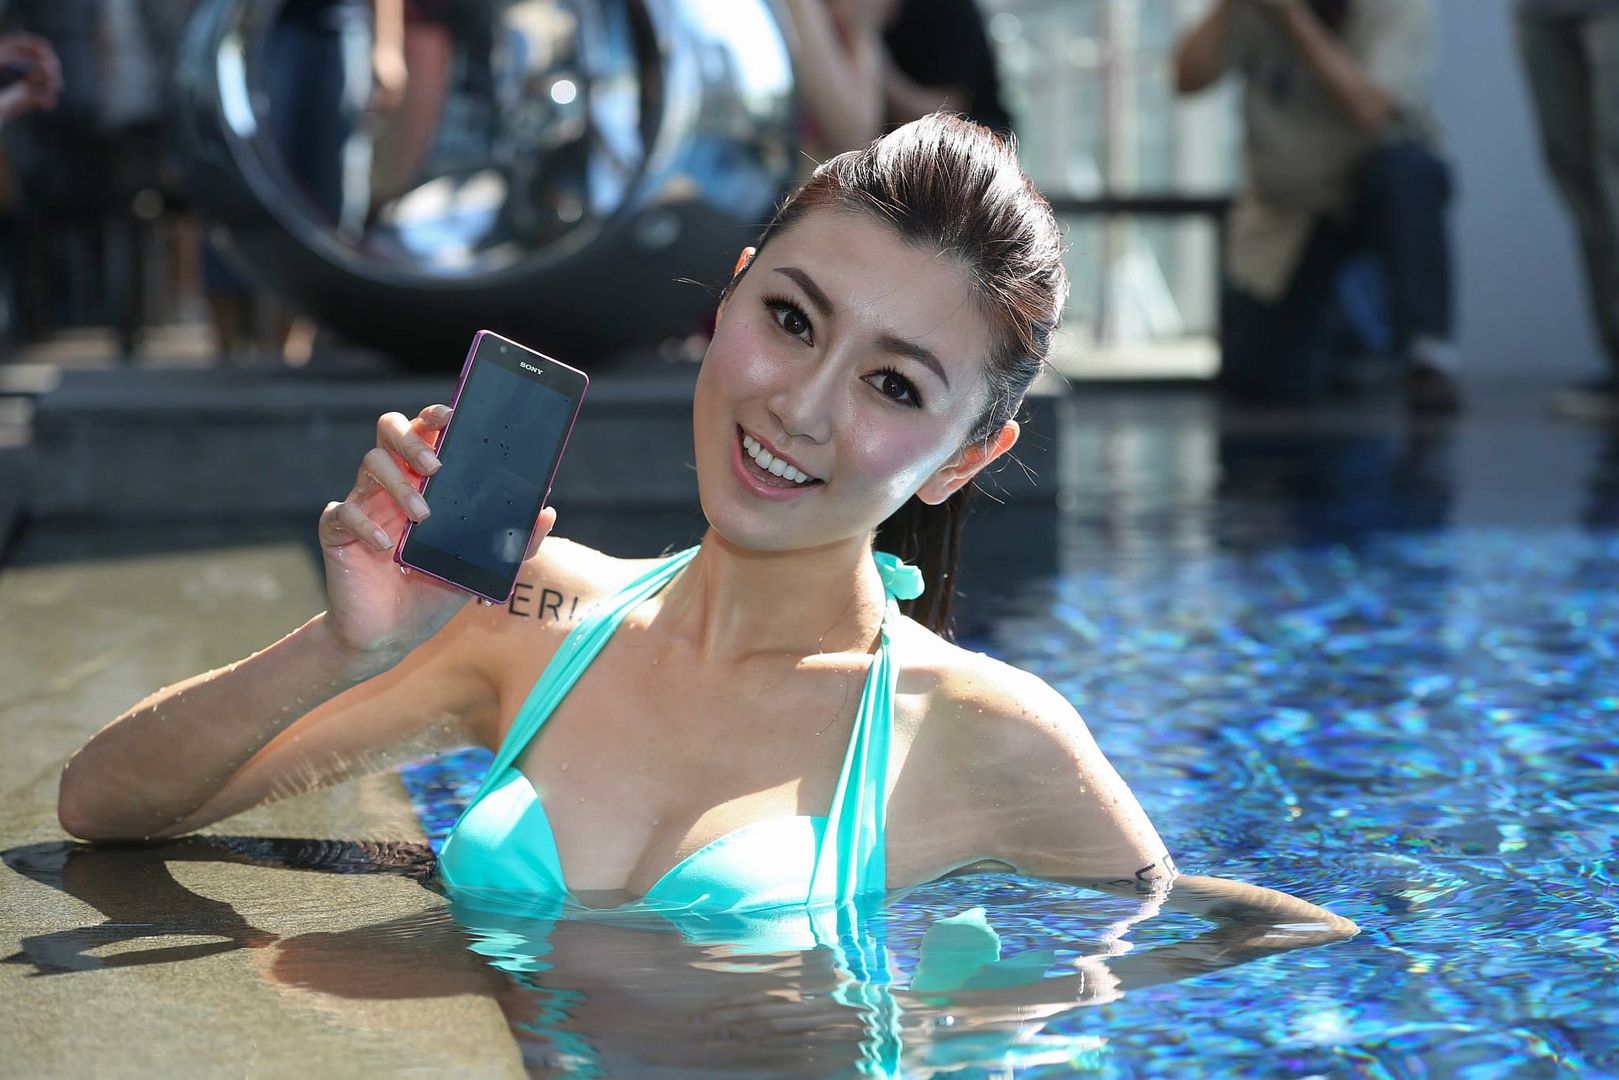 Xperia ZR to get Hong Kong launch in early July 